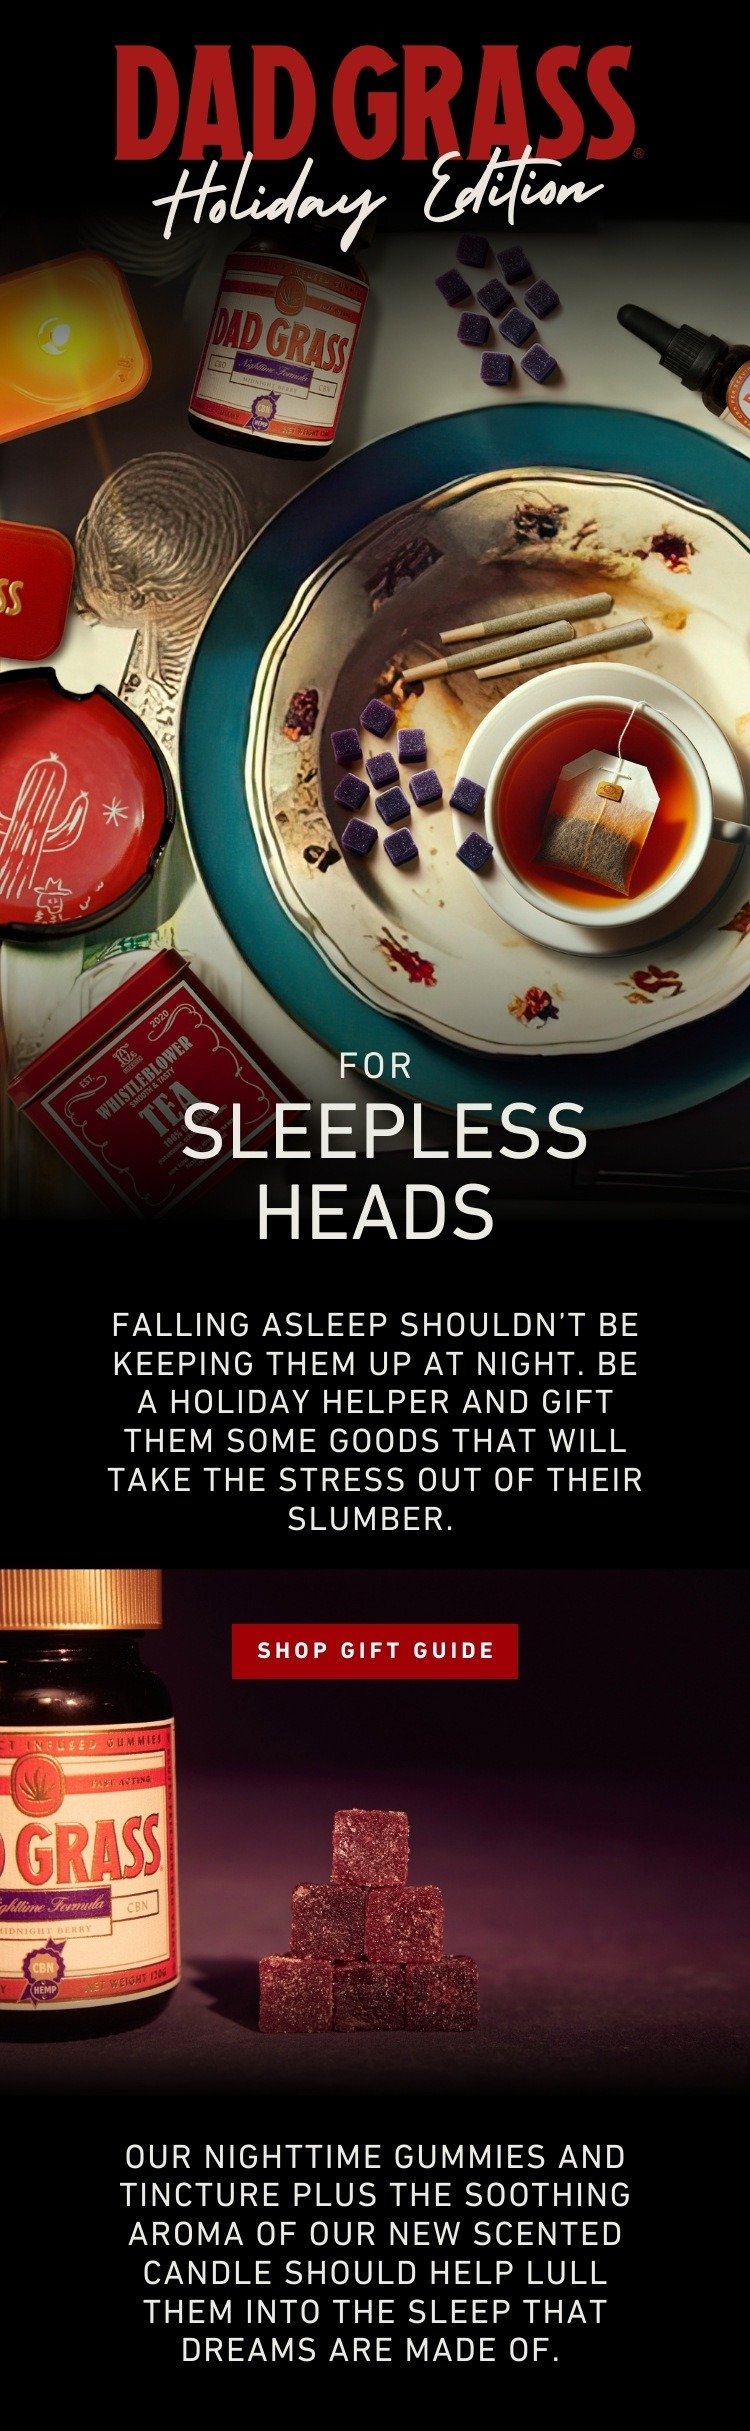 Holiday gifts for the sleepless heads in your life